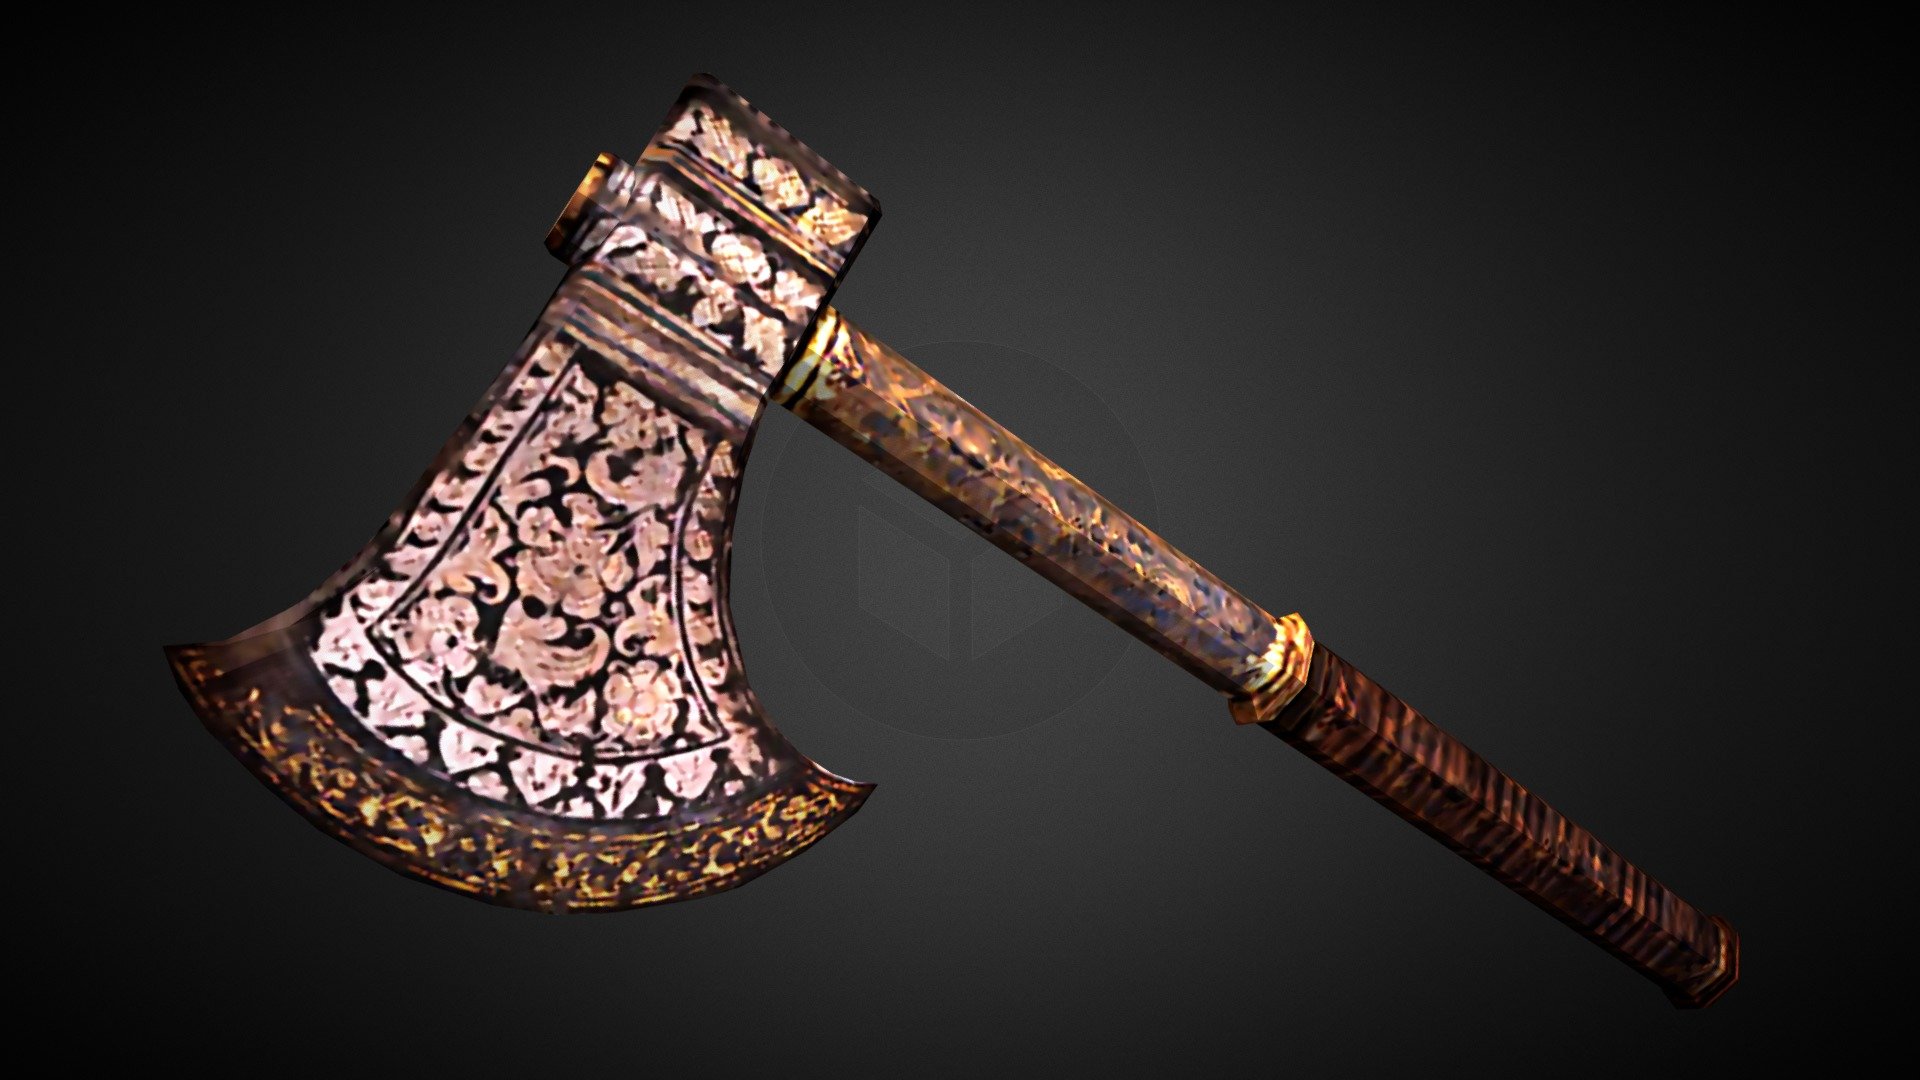 Ornate Axe cs go skin download the last version for iphone